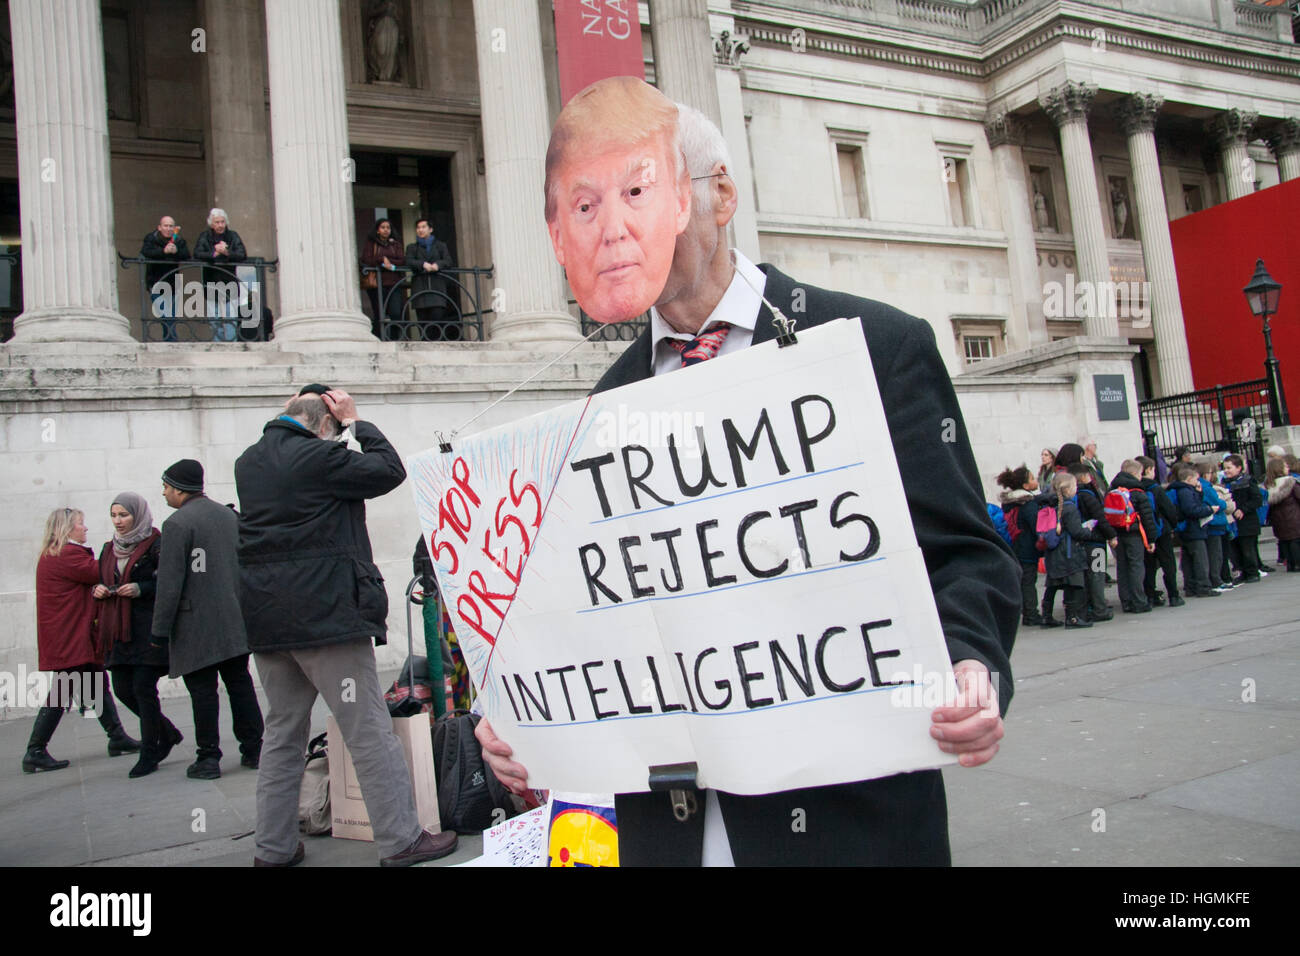 London UK. 11th January 2017. A protester wearing a Donald Trump mask protests against the US military camp in Guantanamo which turns 15 since it was opened in 11 January 2002 Credit: amer ghazzal/Alamy Live News Stock Photo